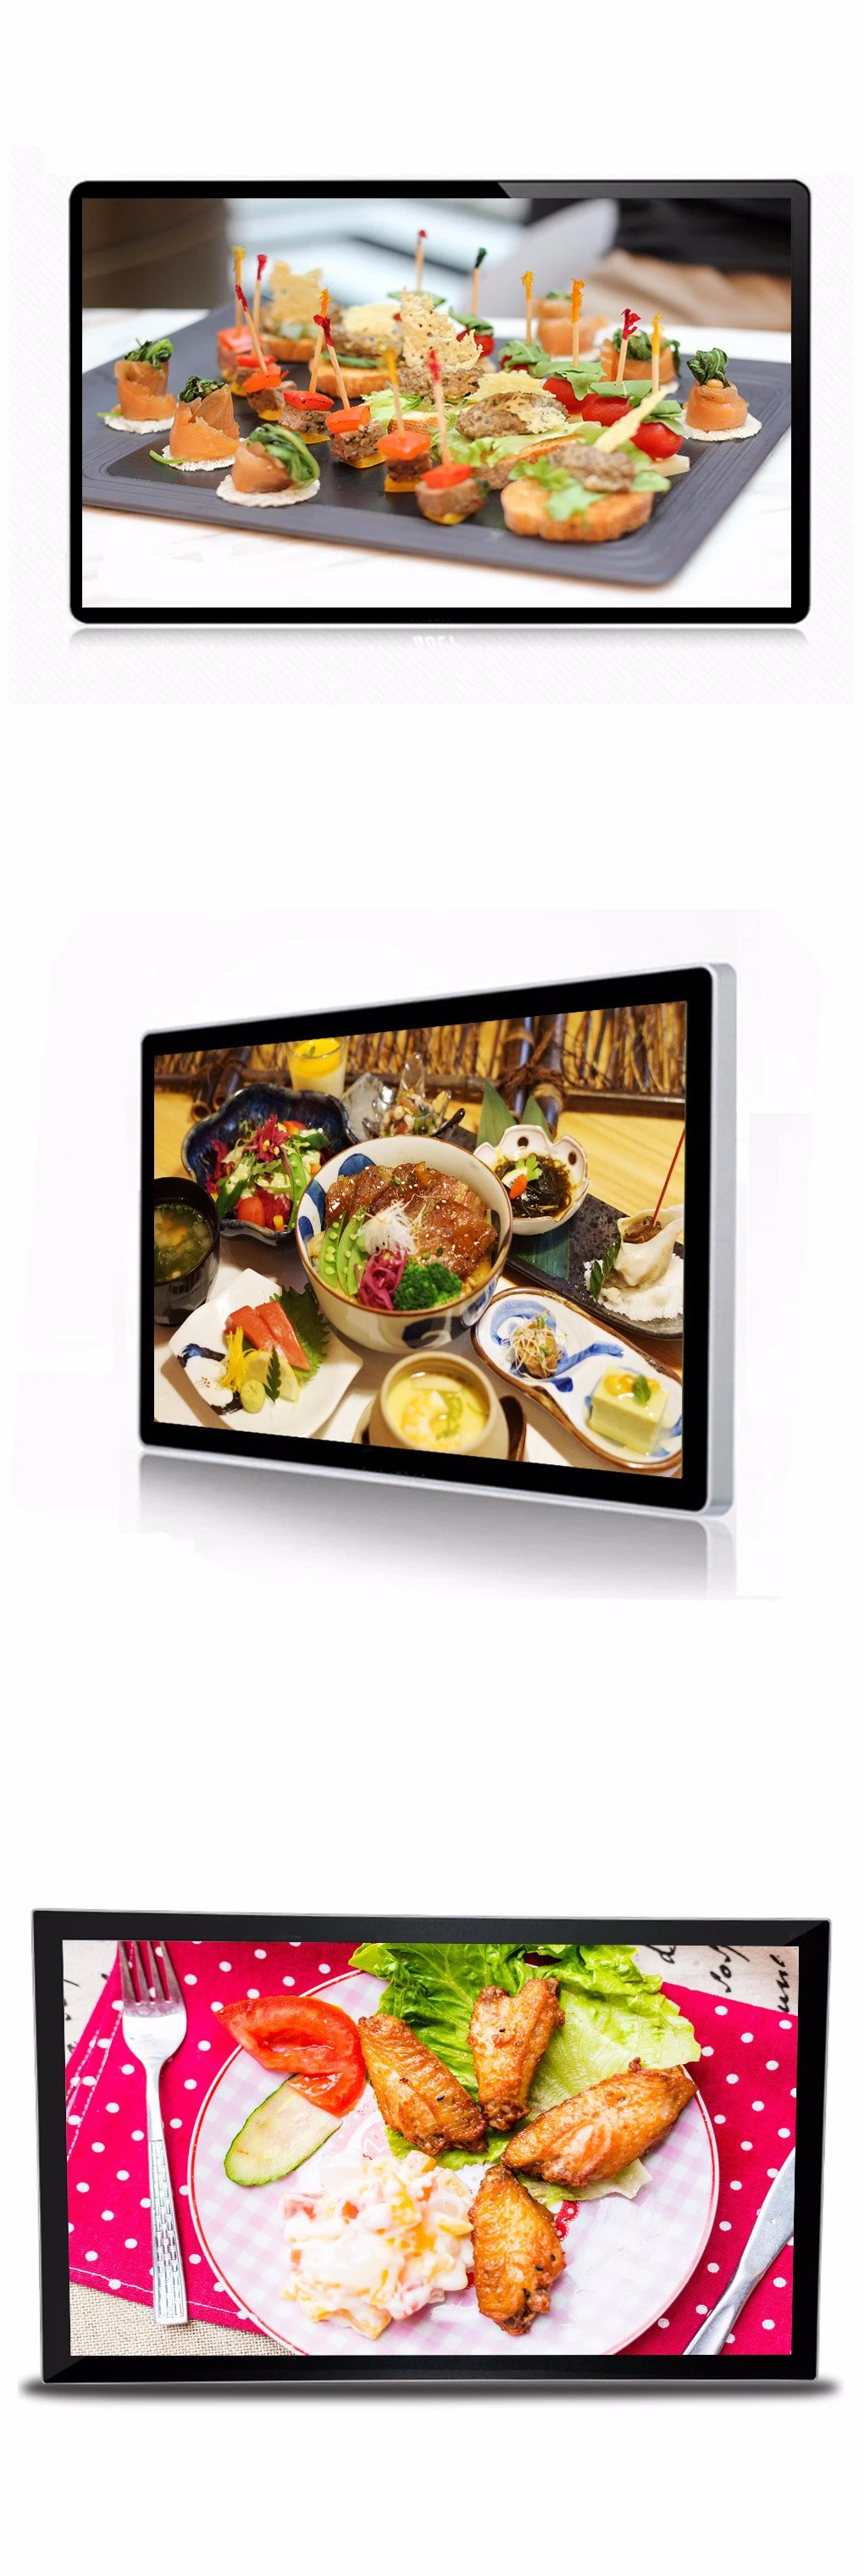 32 Inch Advertising Player Ad Player Ultra-Wall Mount Kiosk Digital Advertising Screens LCD Digital Signage